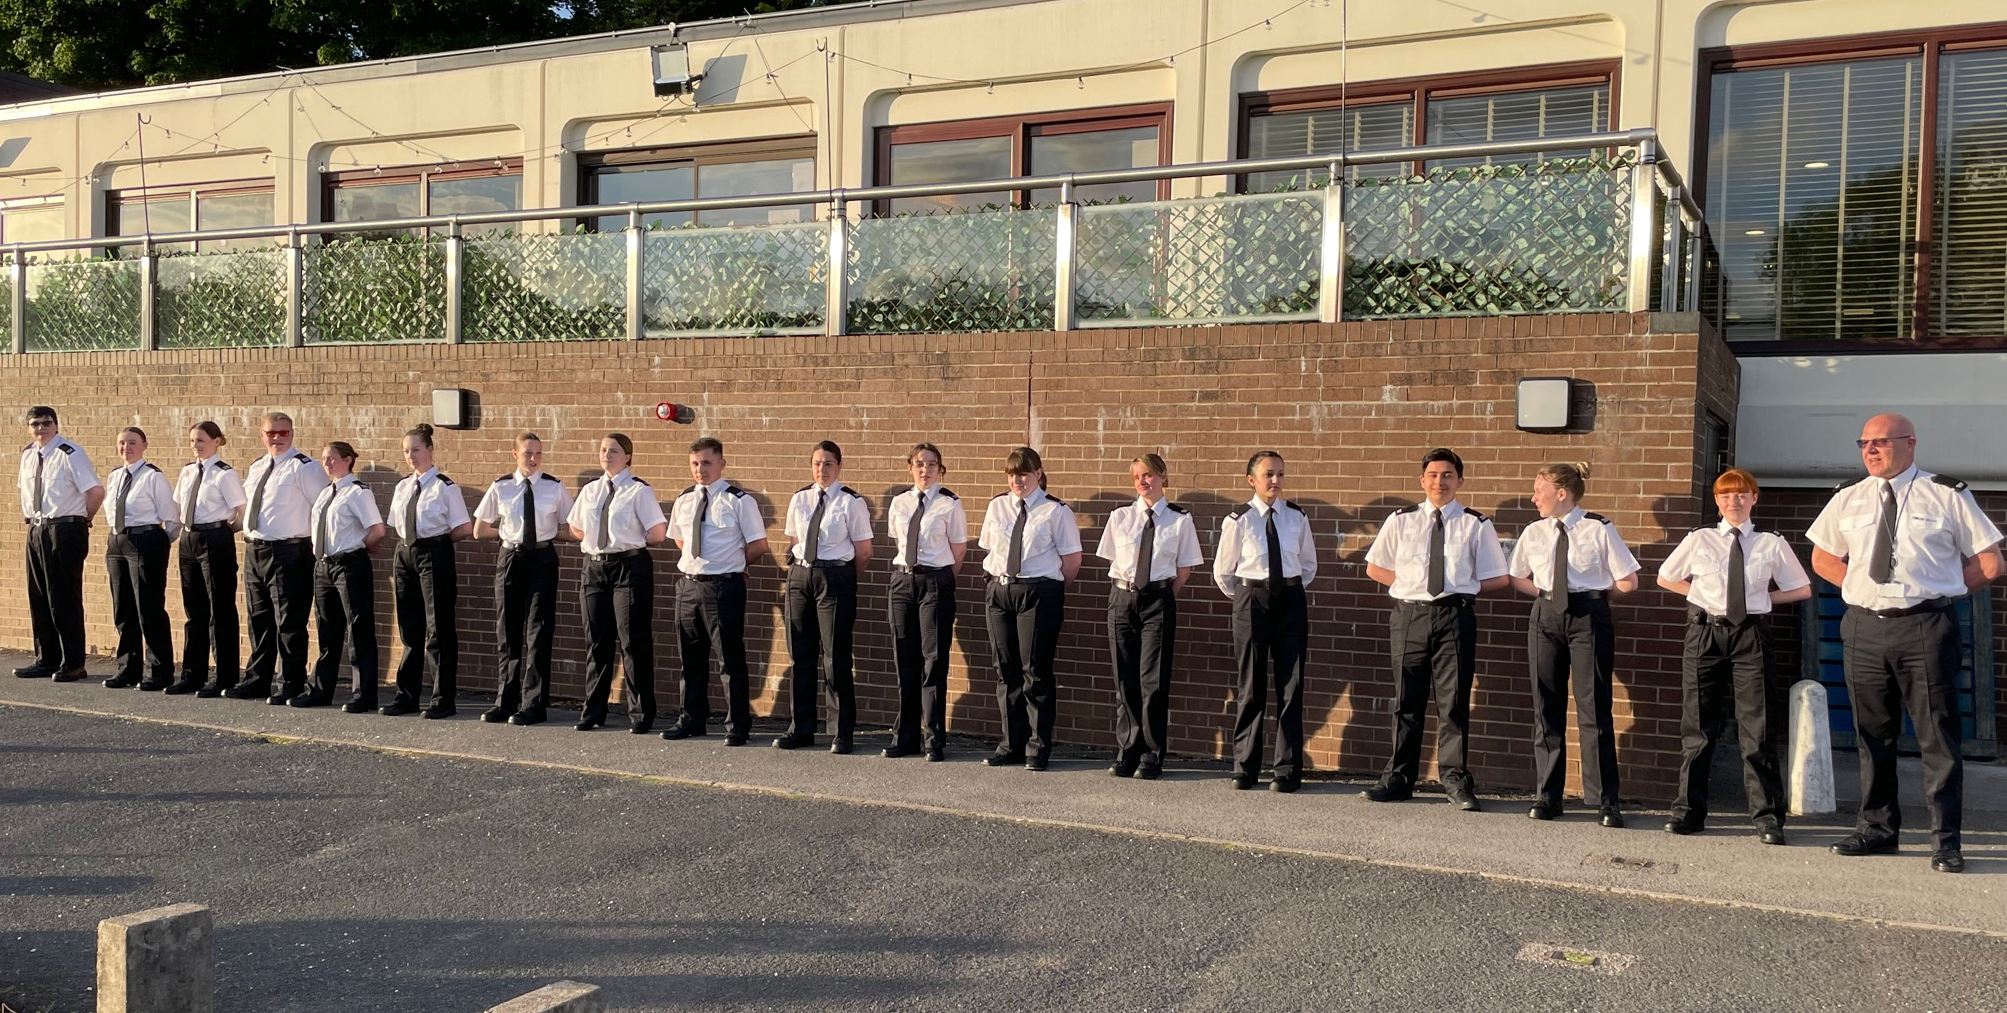 South Yorkshire Police Cadets lined up against a wall